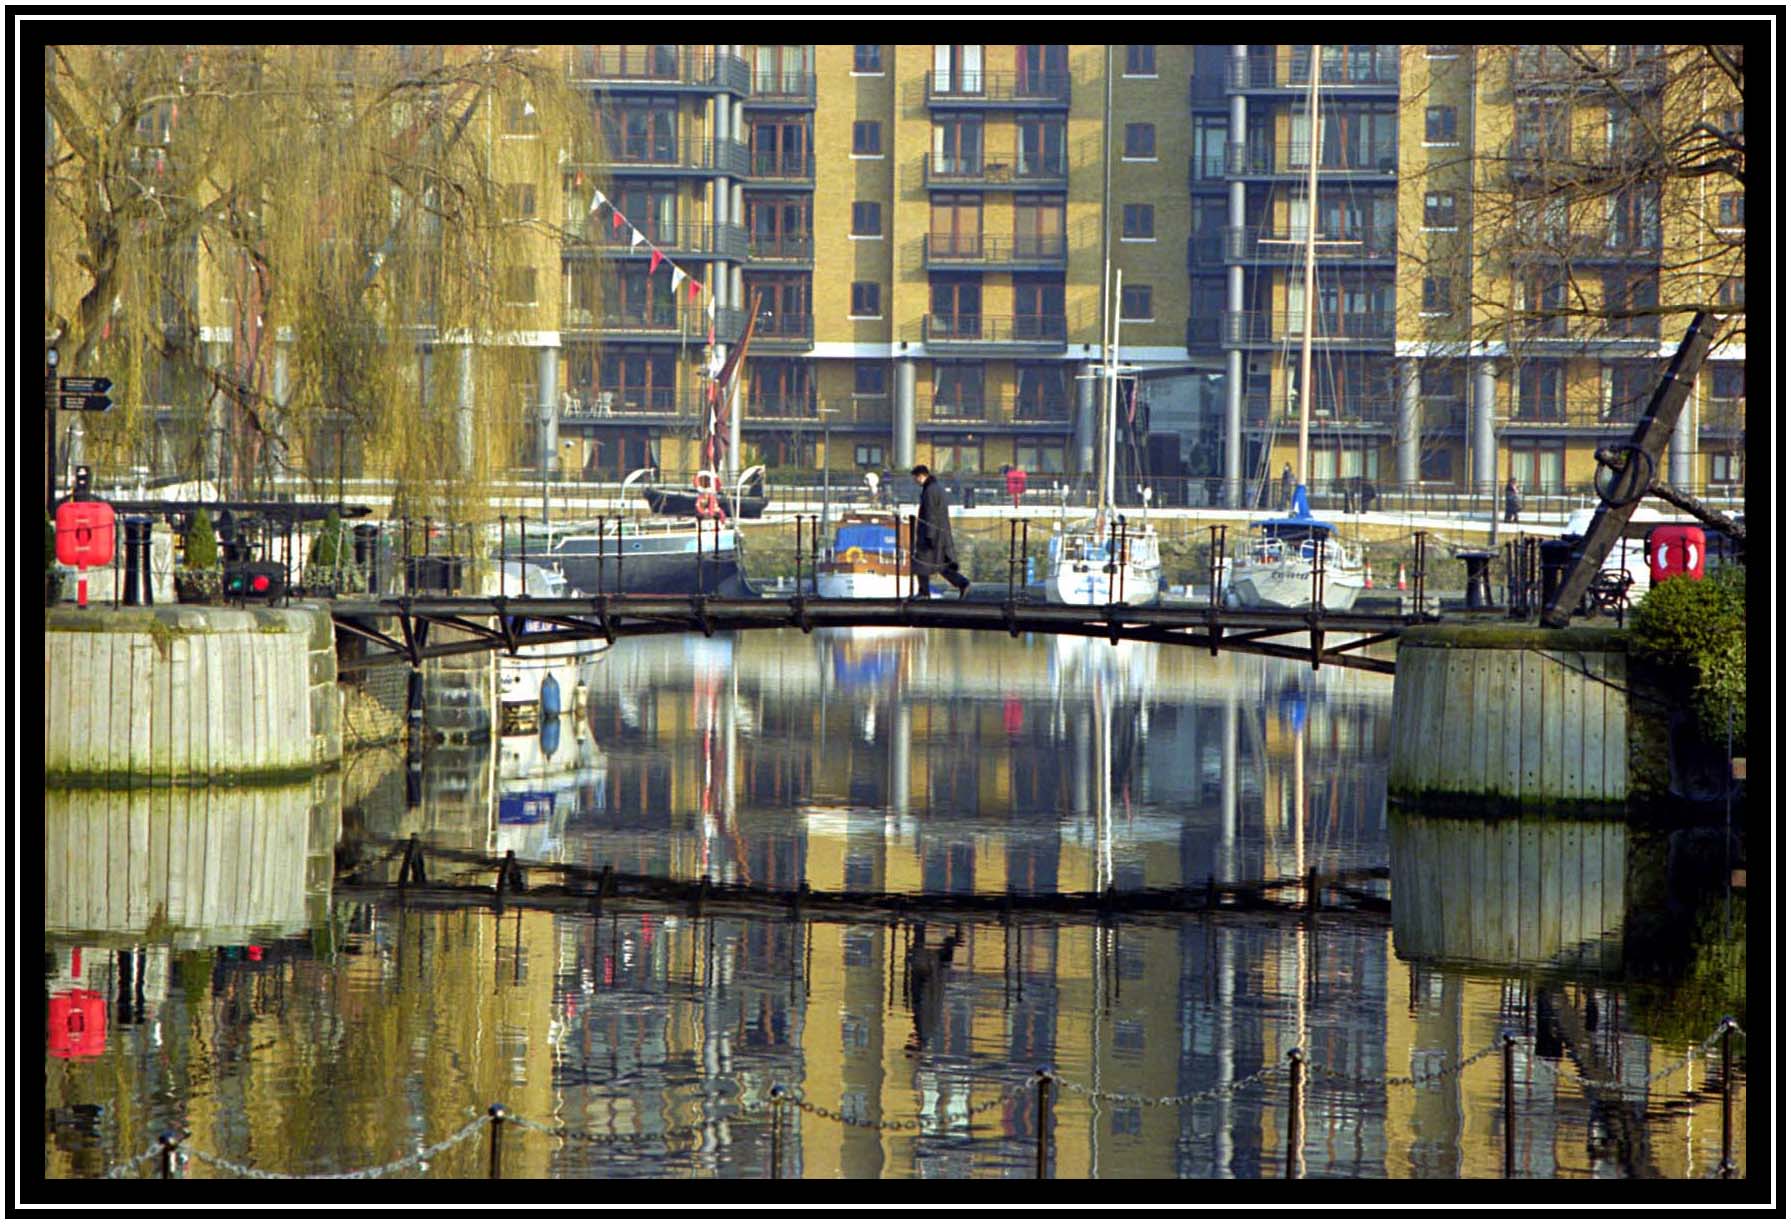 2001 01 17 St. Catherines Dock Reflections 2.jpg